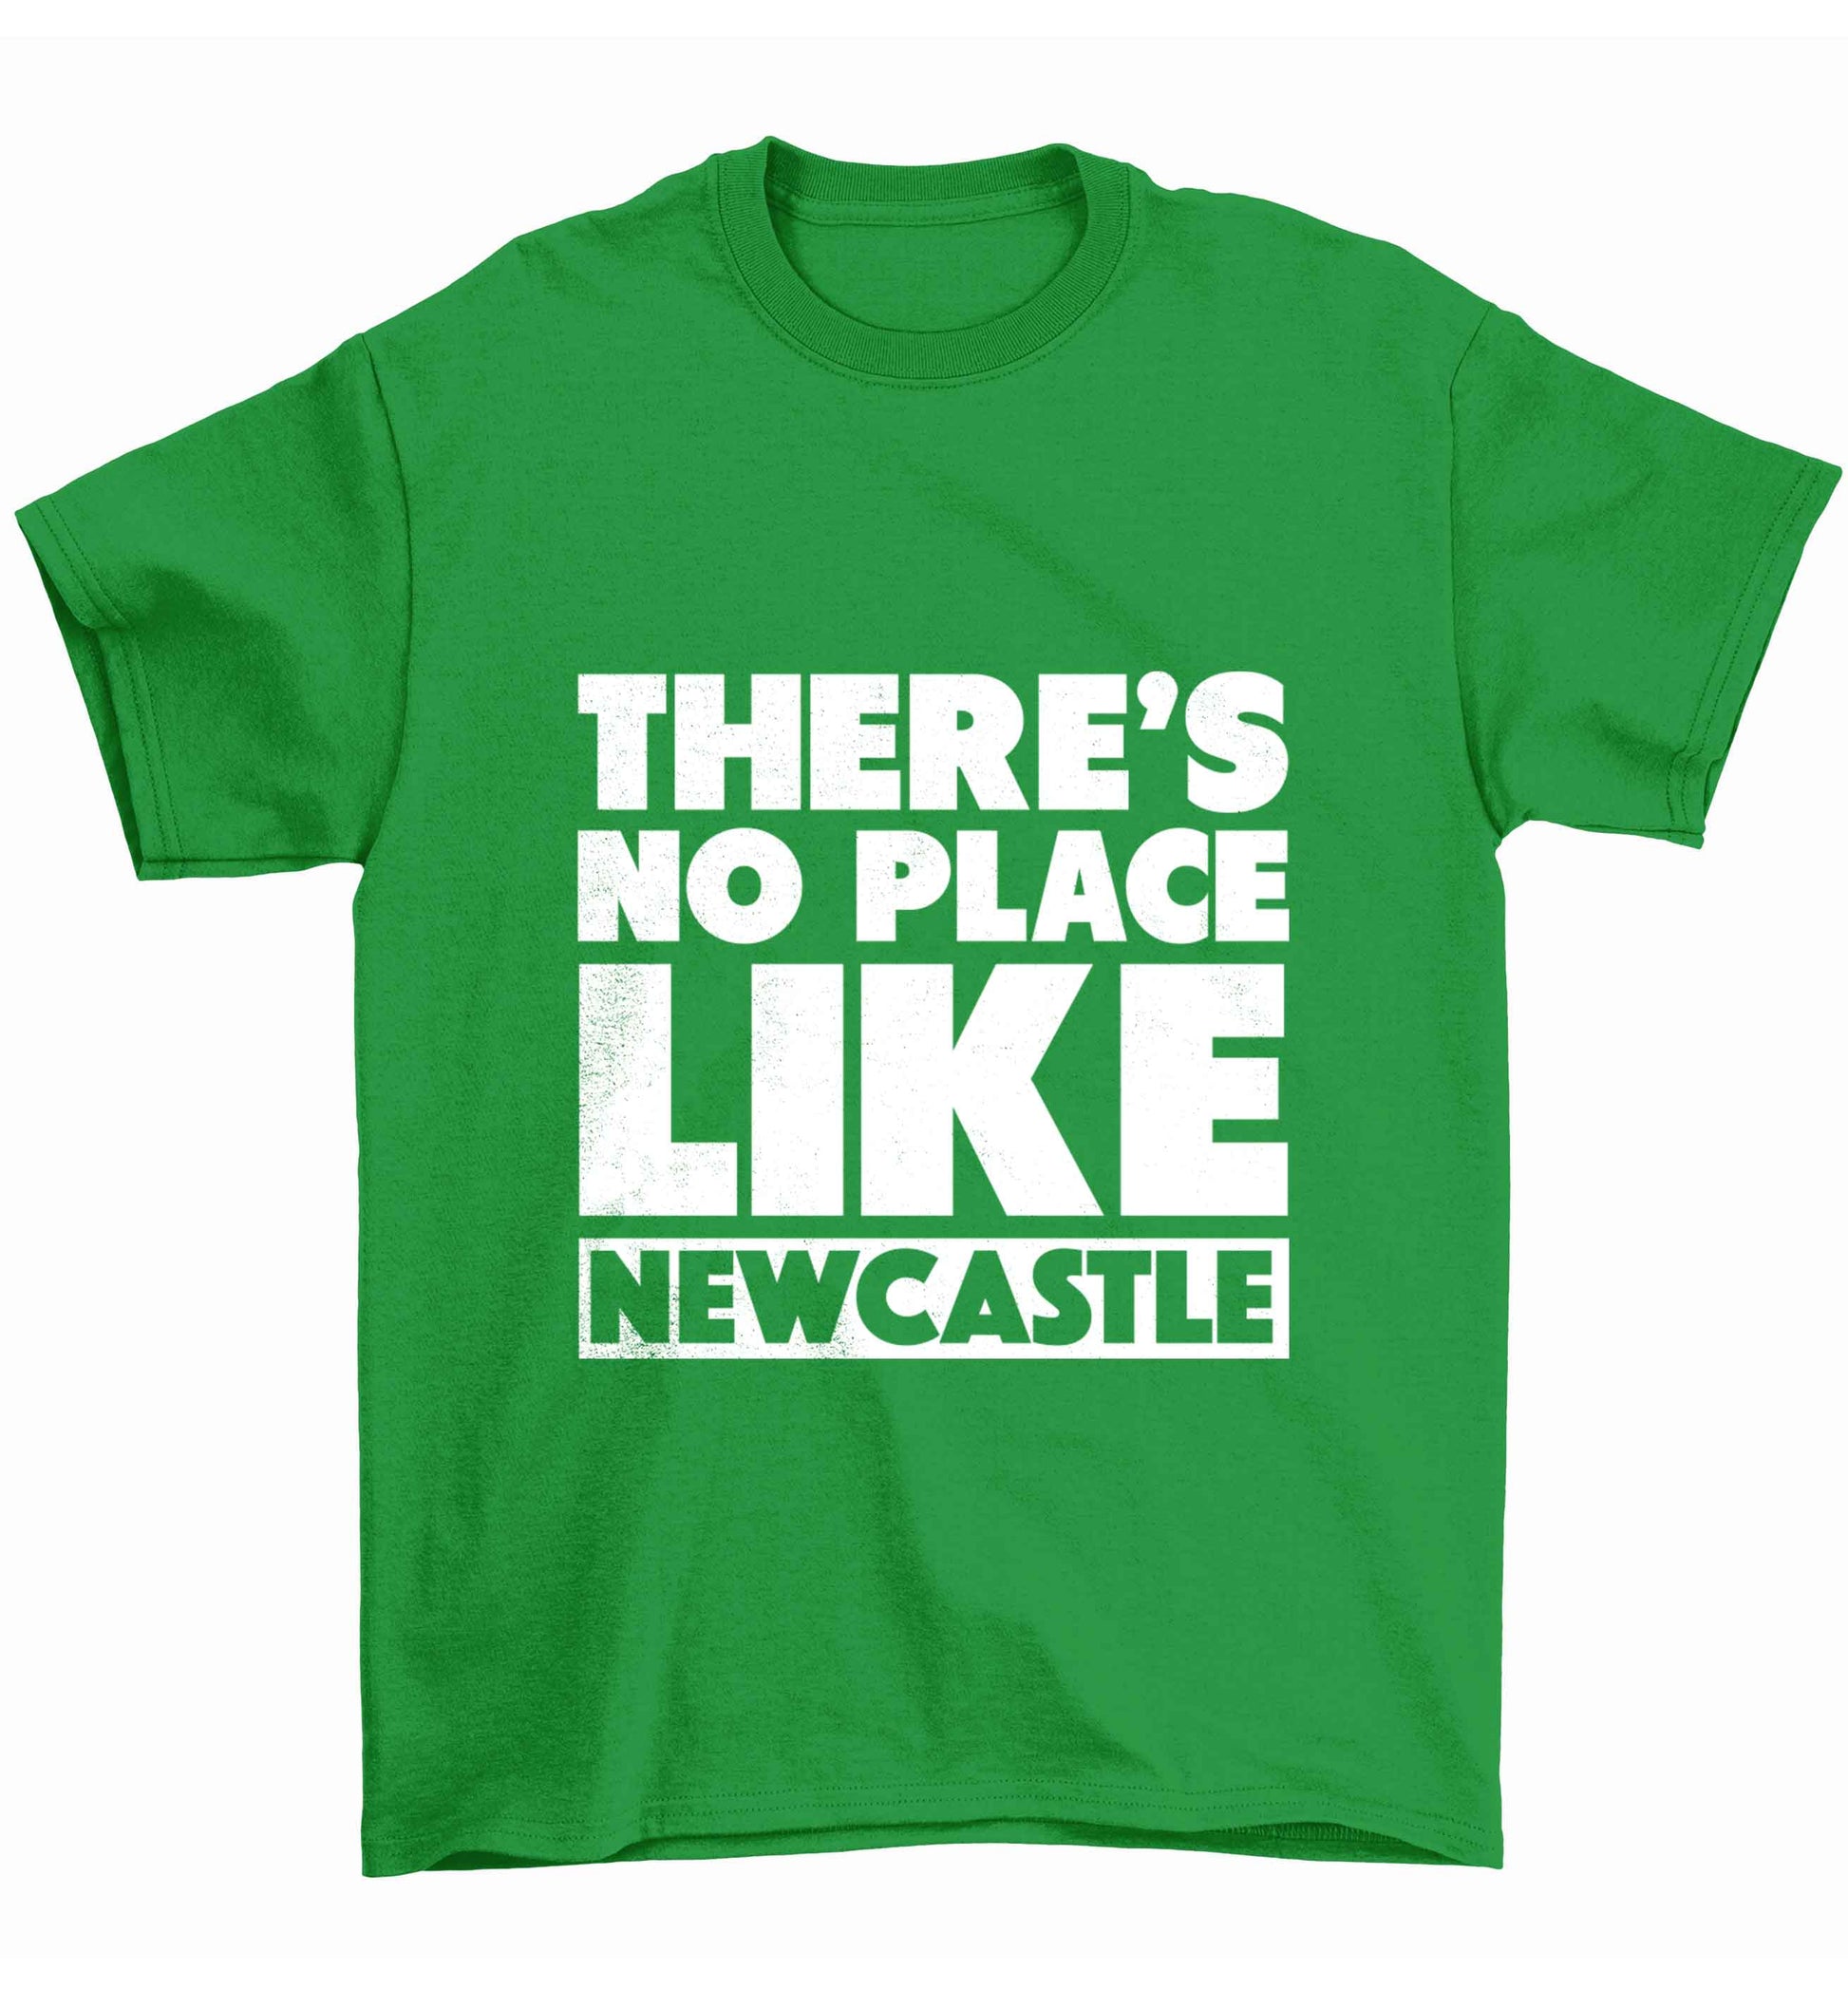 There's no place like Newcastle Children's green Tshirt 12-13 Years